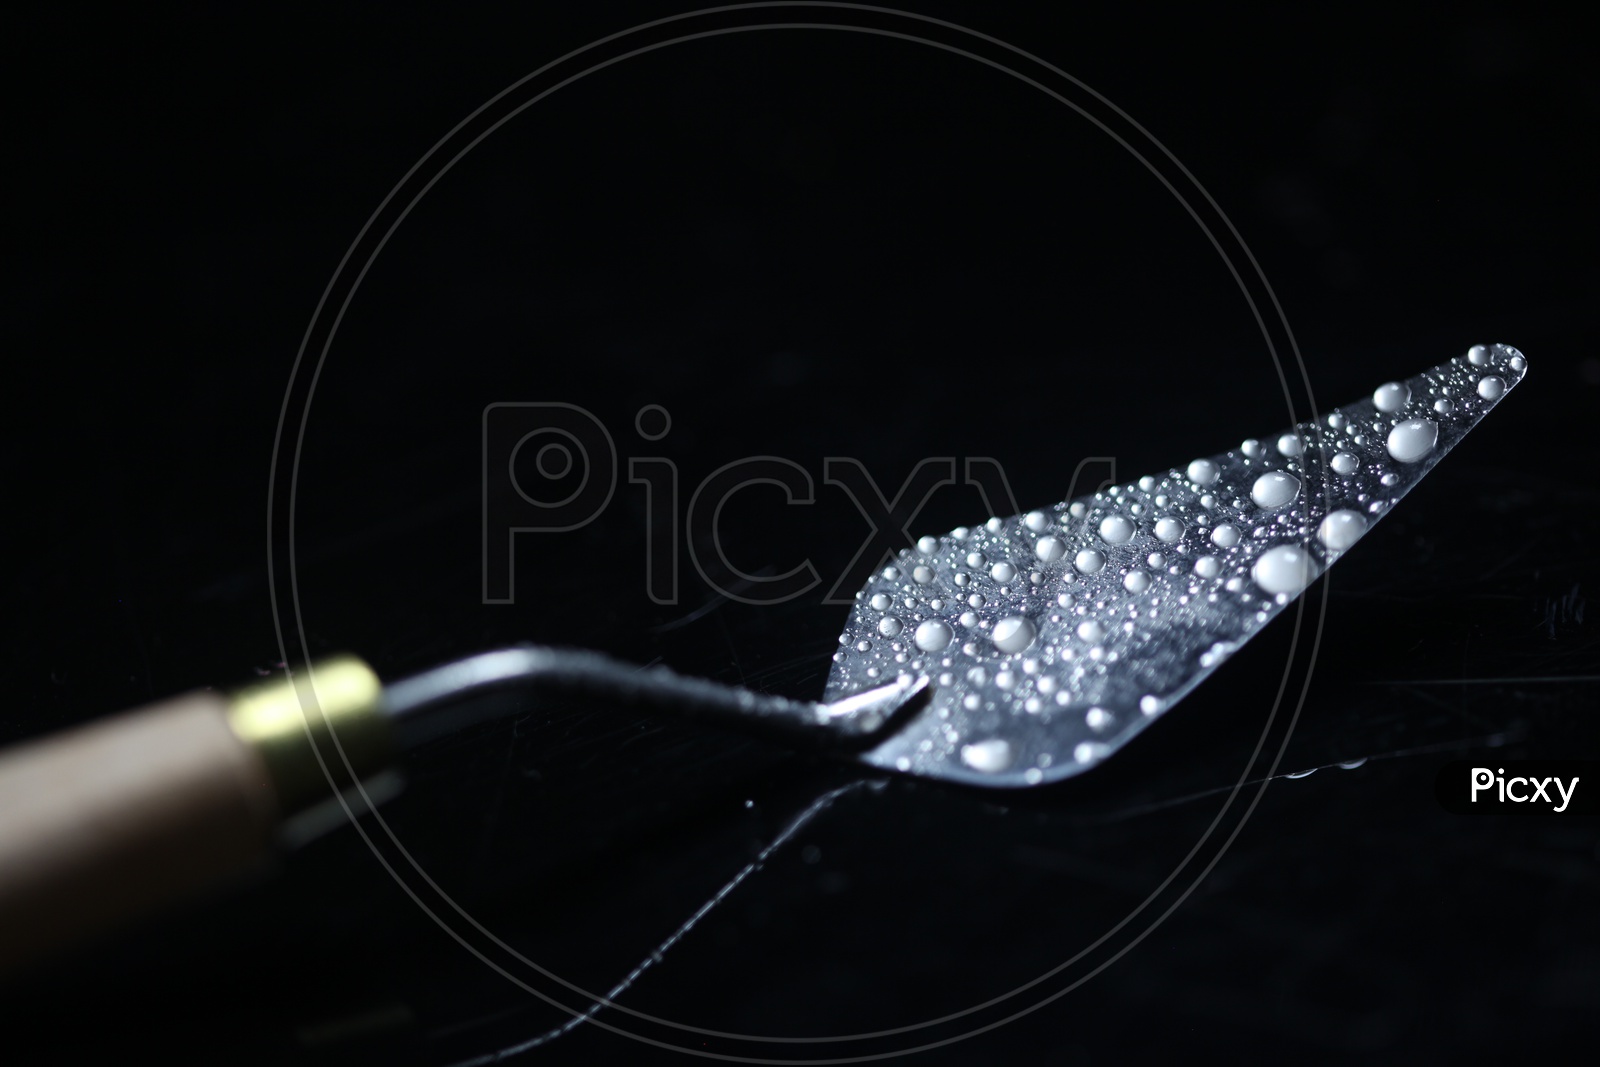 Water Droplets On a Spatula Over a Dark Black Background